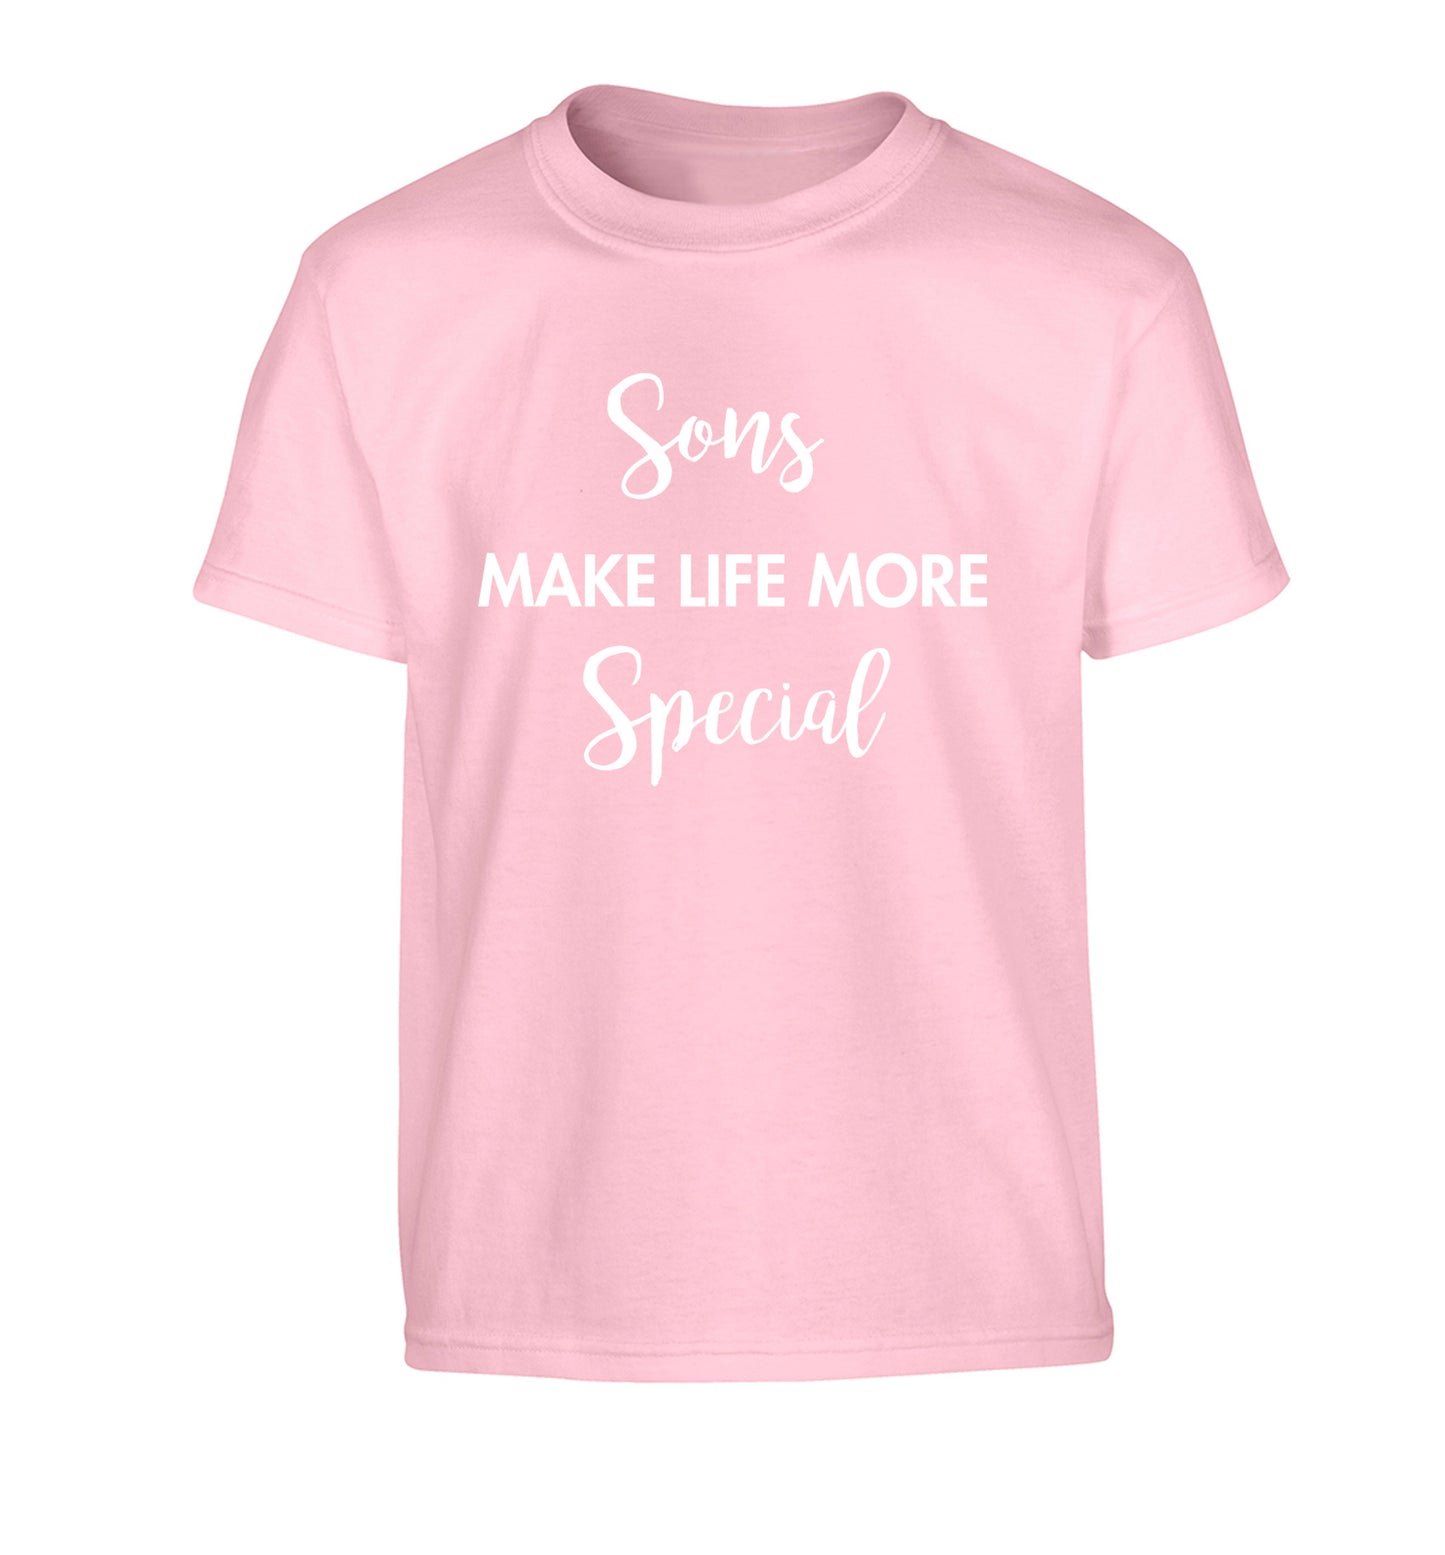 Daughters make life more special Children's light pink Tshirt 12-14 Years